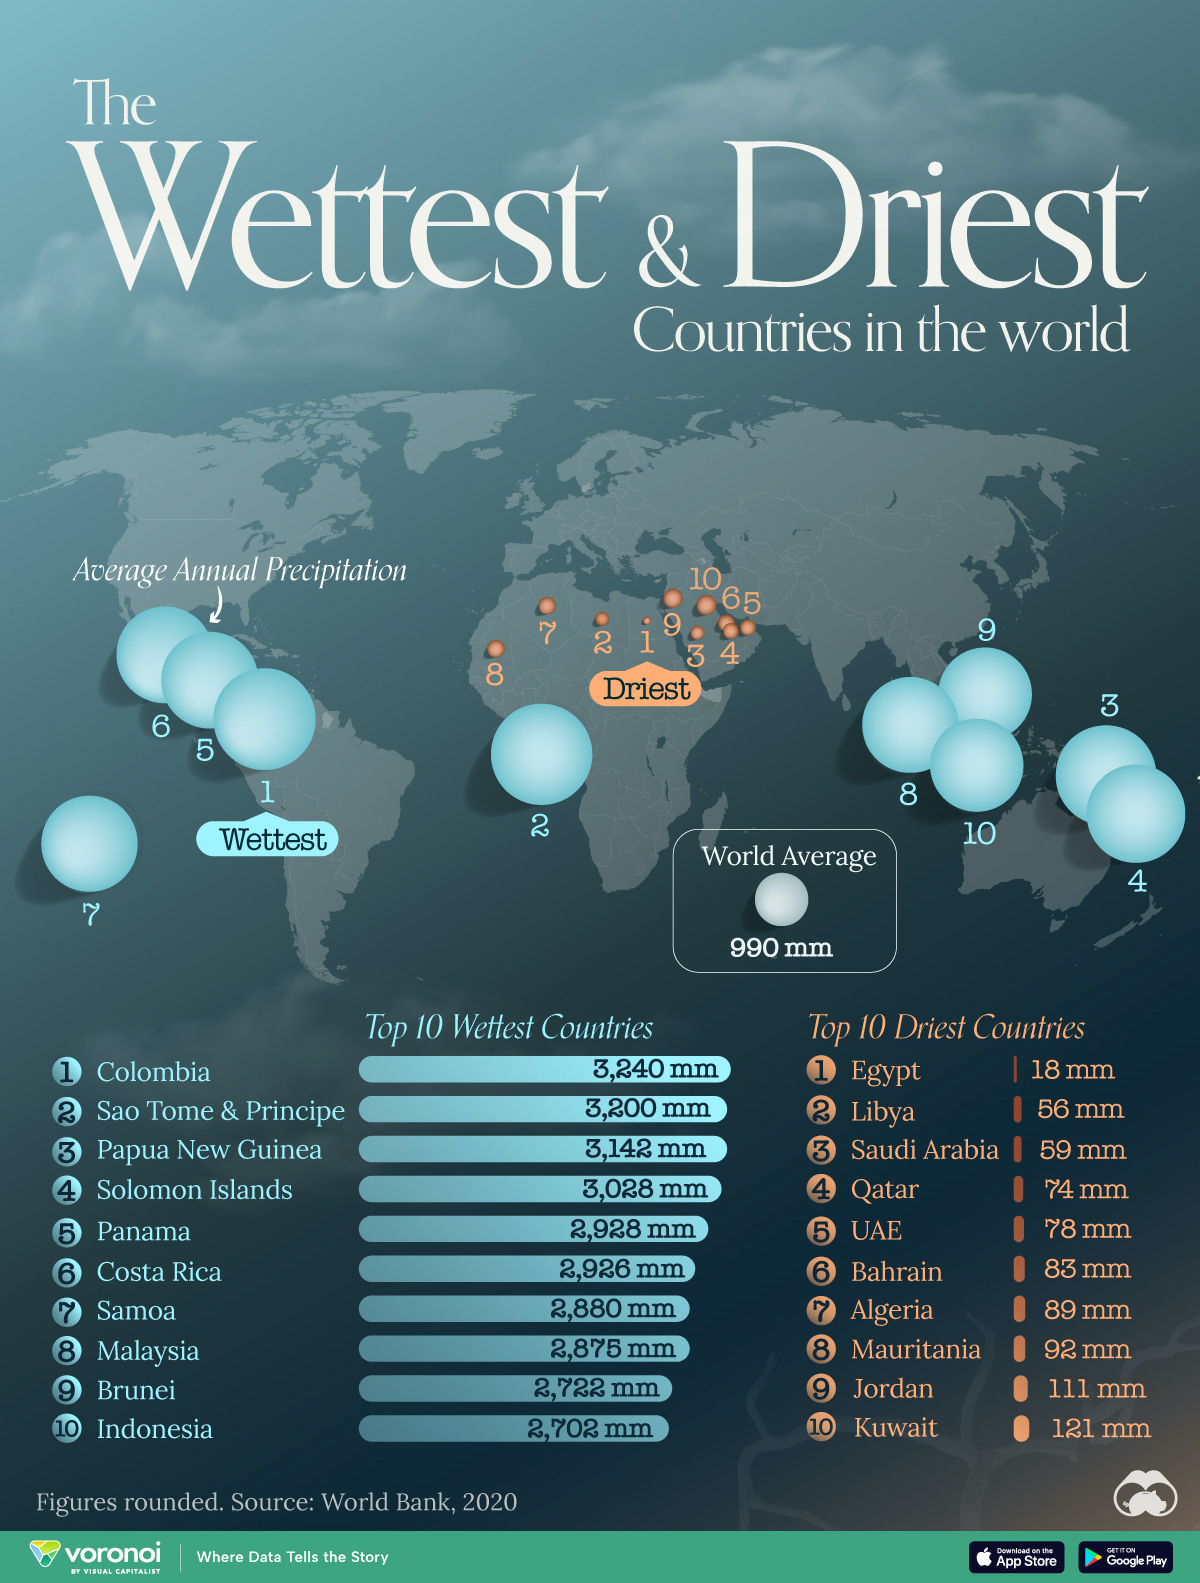 A map of the wettest and driest countries in the world along with their average annual precipitation in millimeters.